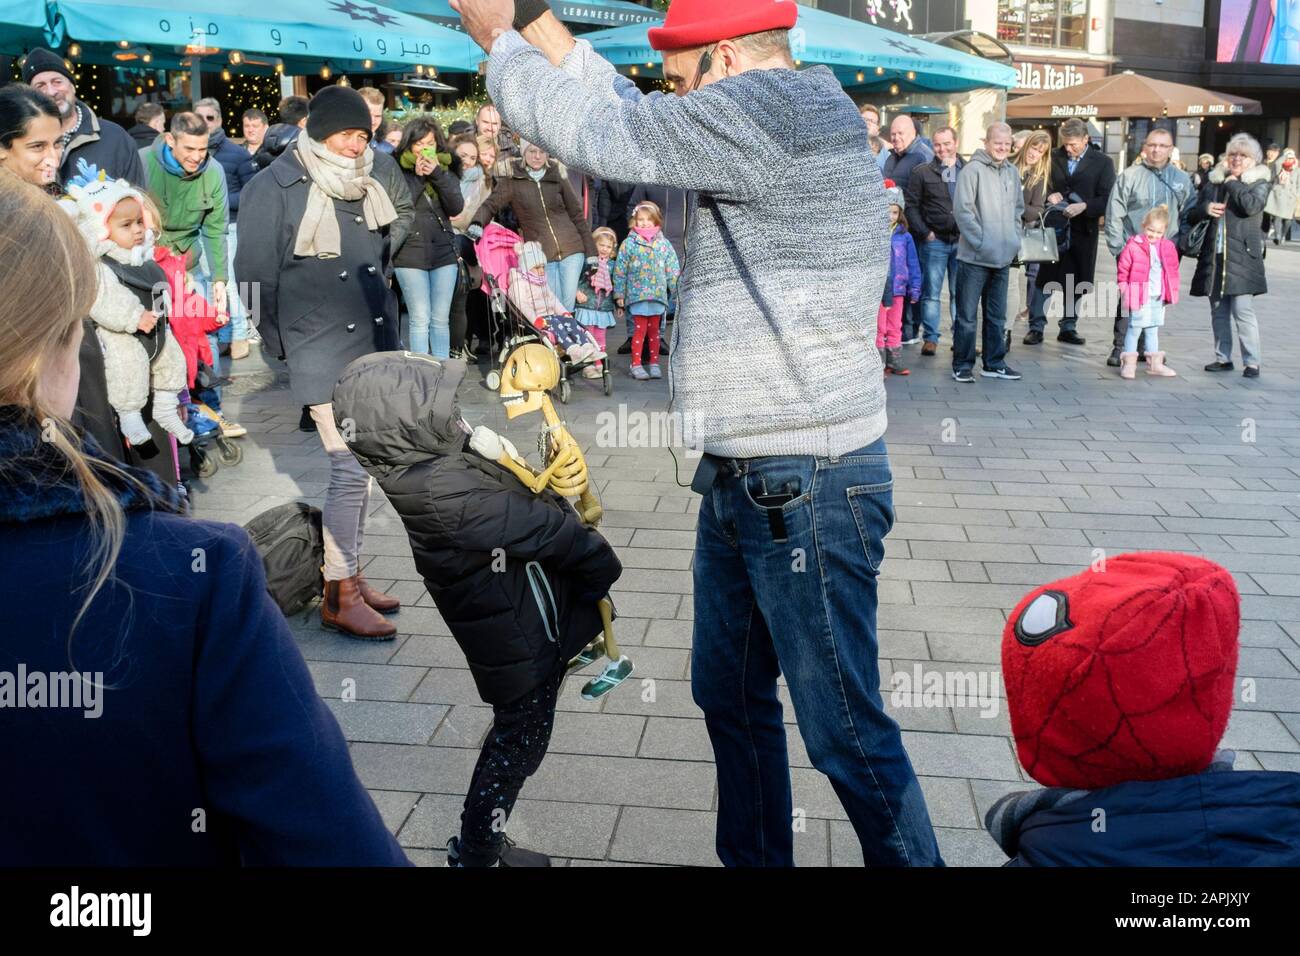 Puppeteer entertains a crowd gathered in Leicester Square, London, UK Stock Photo